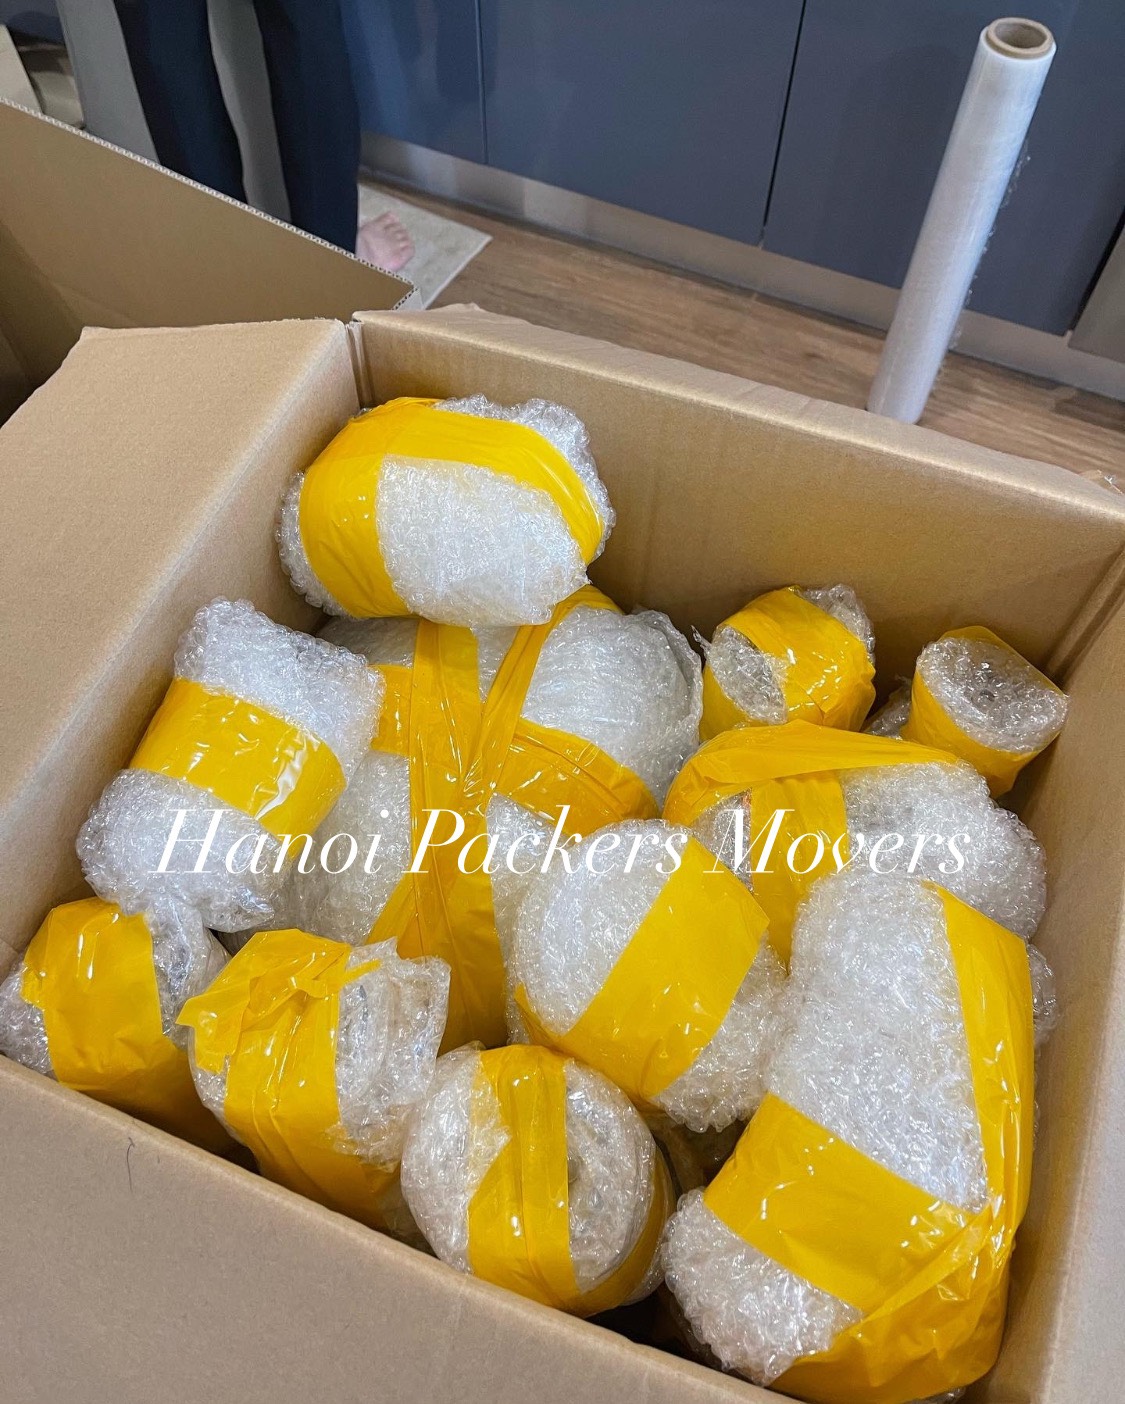 Hanoi Packers Movers packing fragile items for safe moving to Hoi An 